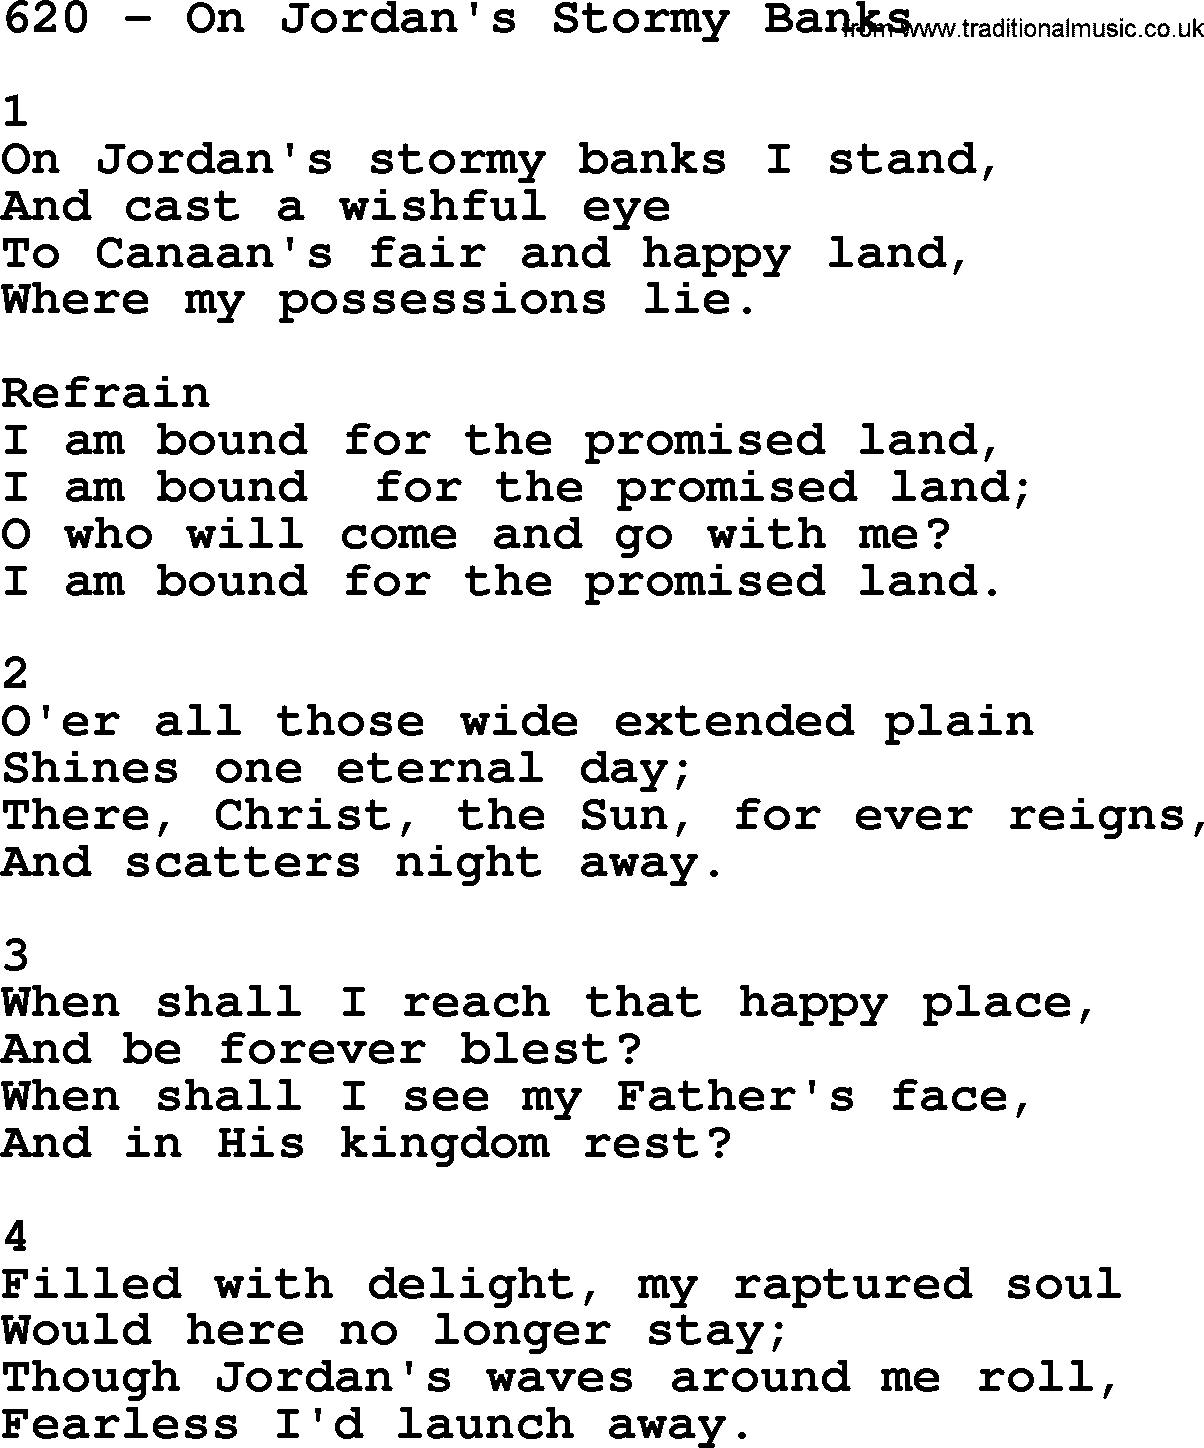 Complete Adventis Hymnal, title: 620-On Jordan's Stormy Banks, with lyrics, midi, mp3, powerpoints(PPT) and PDF,